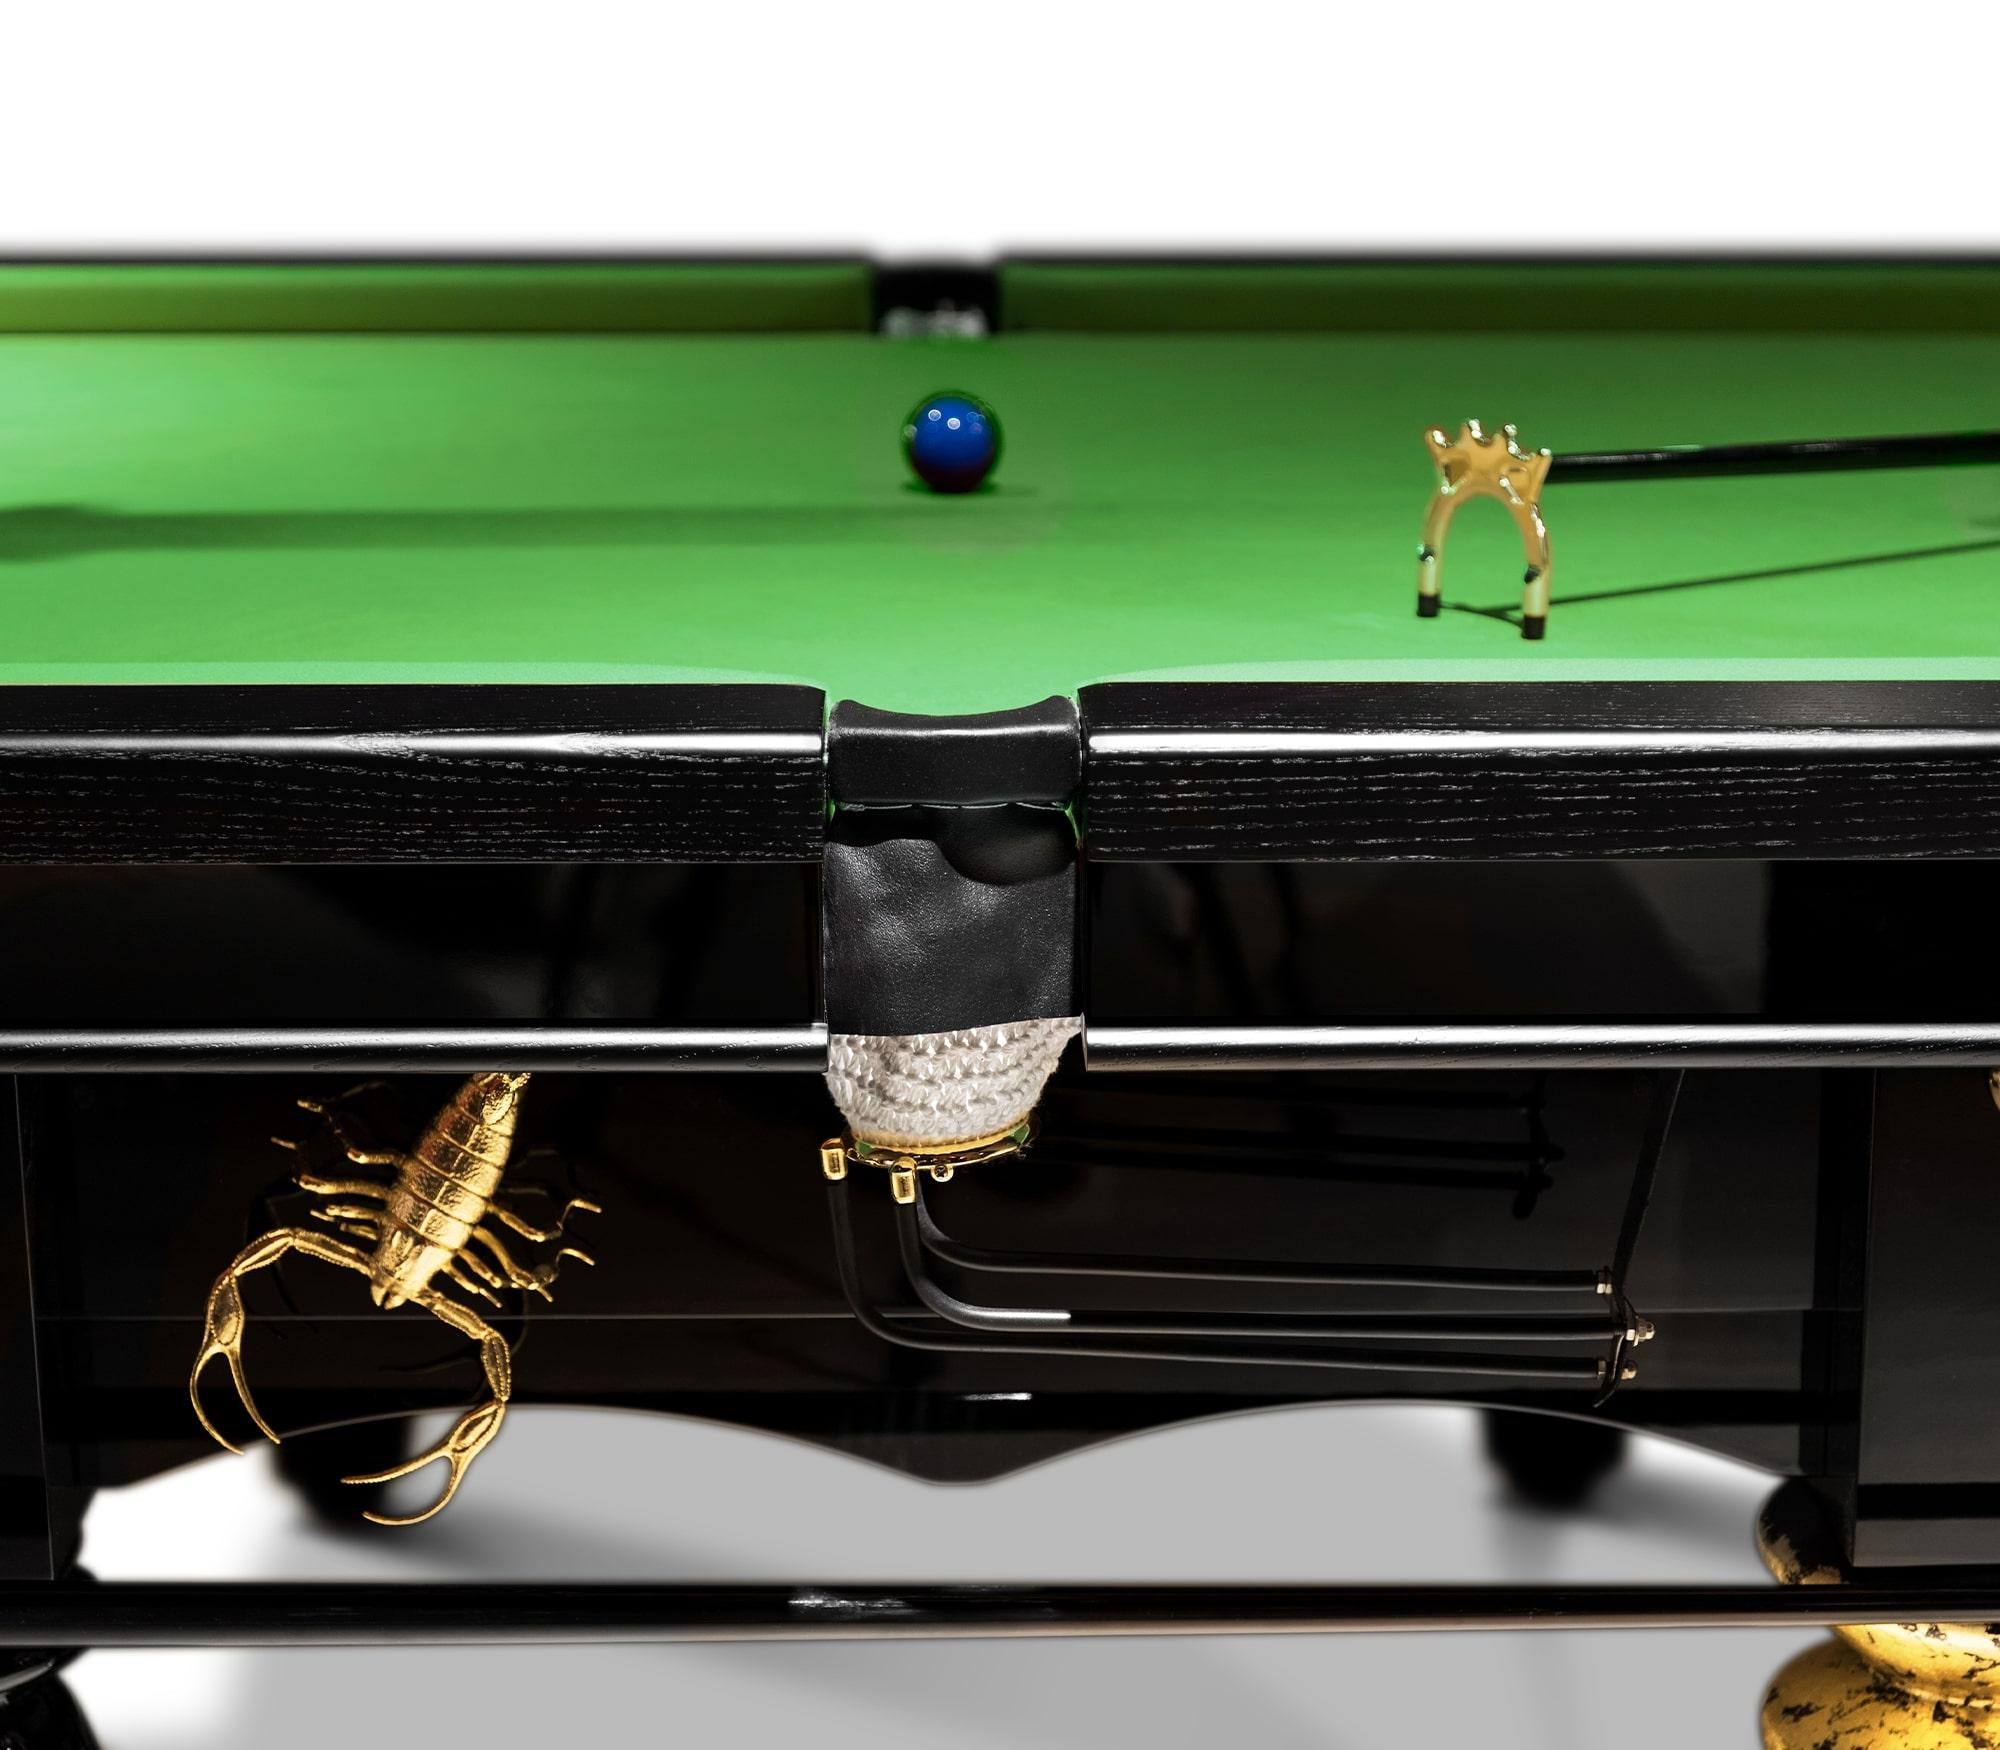 A playful and remarkable design imagined for those who appreciate the good things in life, finding beauty in the most unexpected places. An extraordinary English snooker table of 10 foot playground, founded by 8 statement designed black wood legs